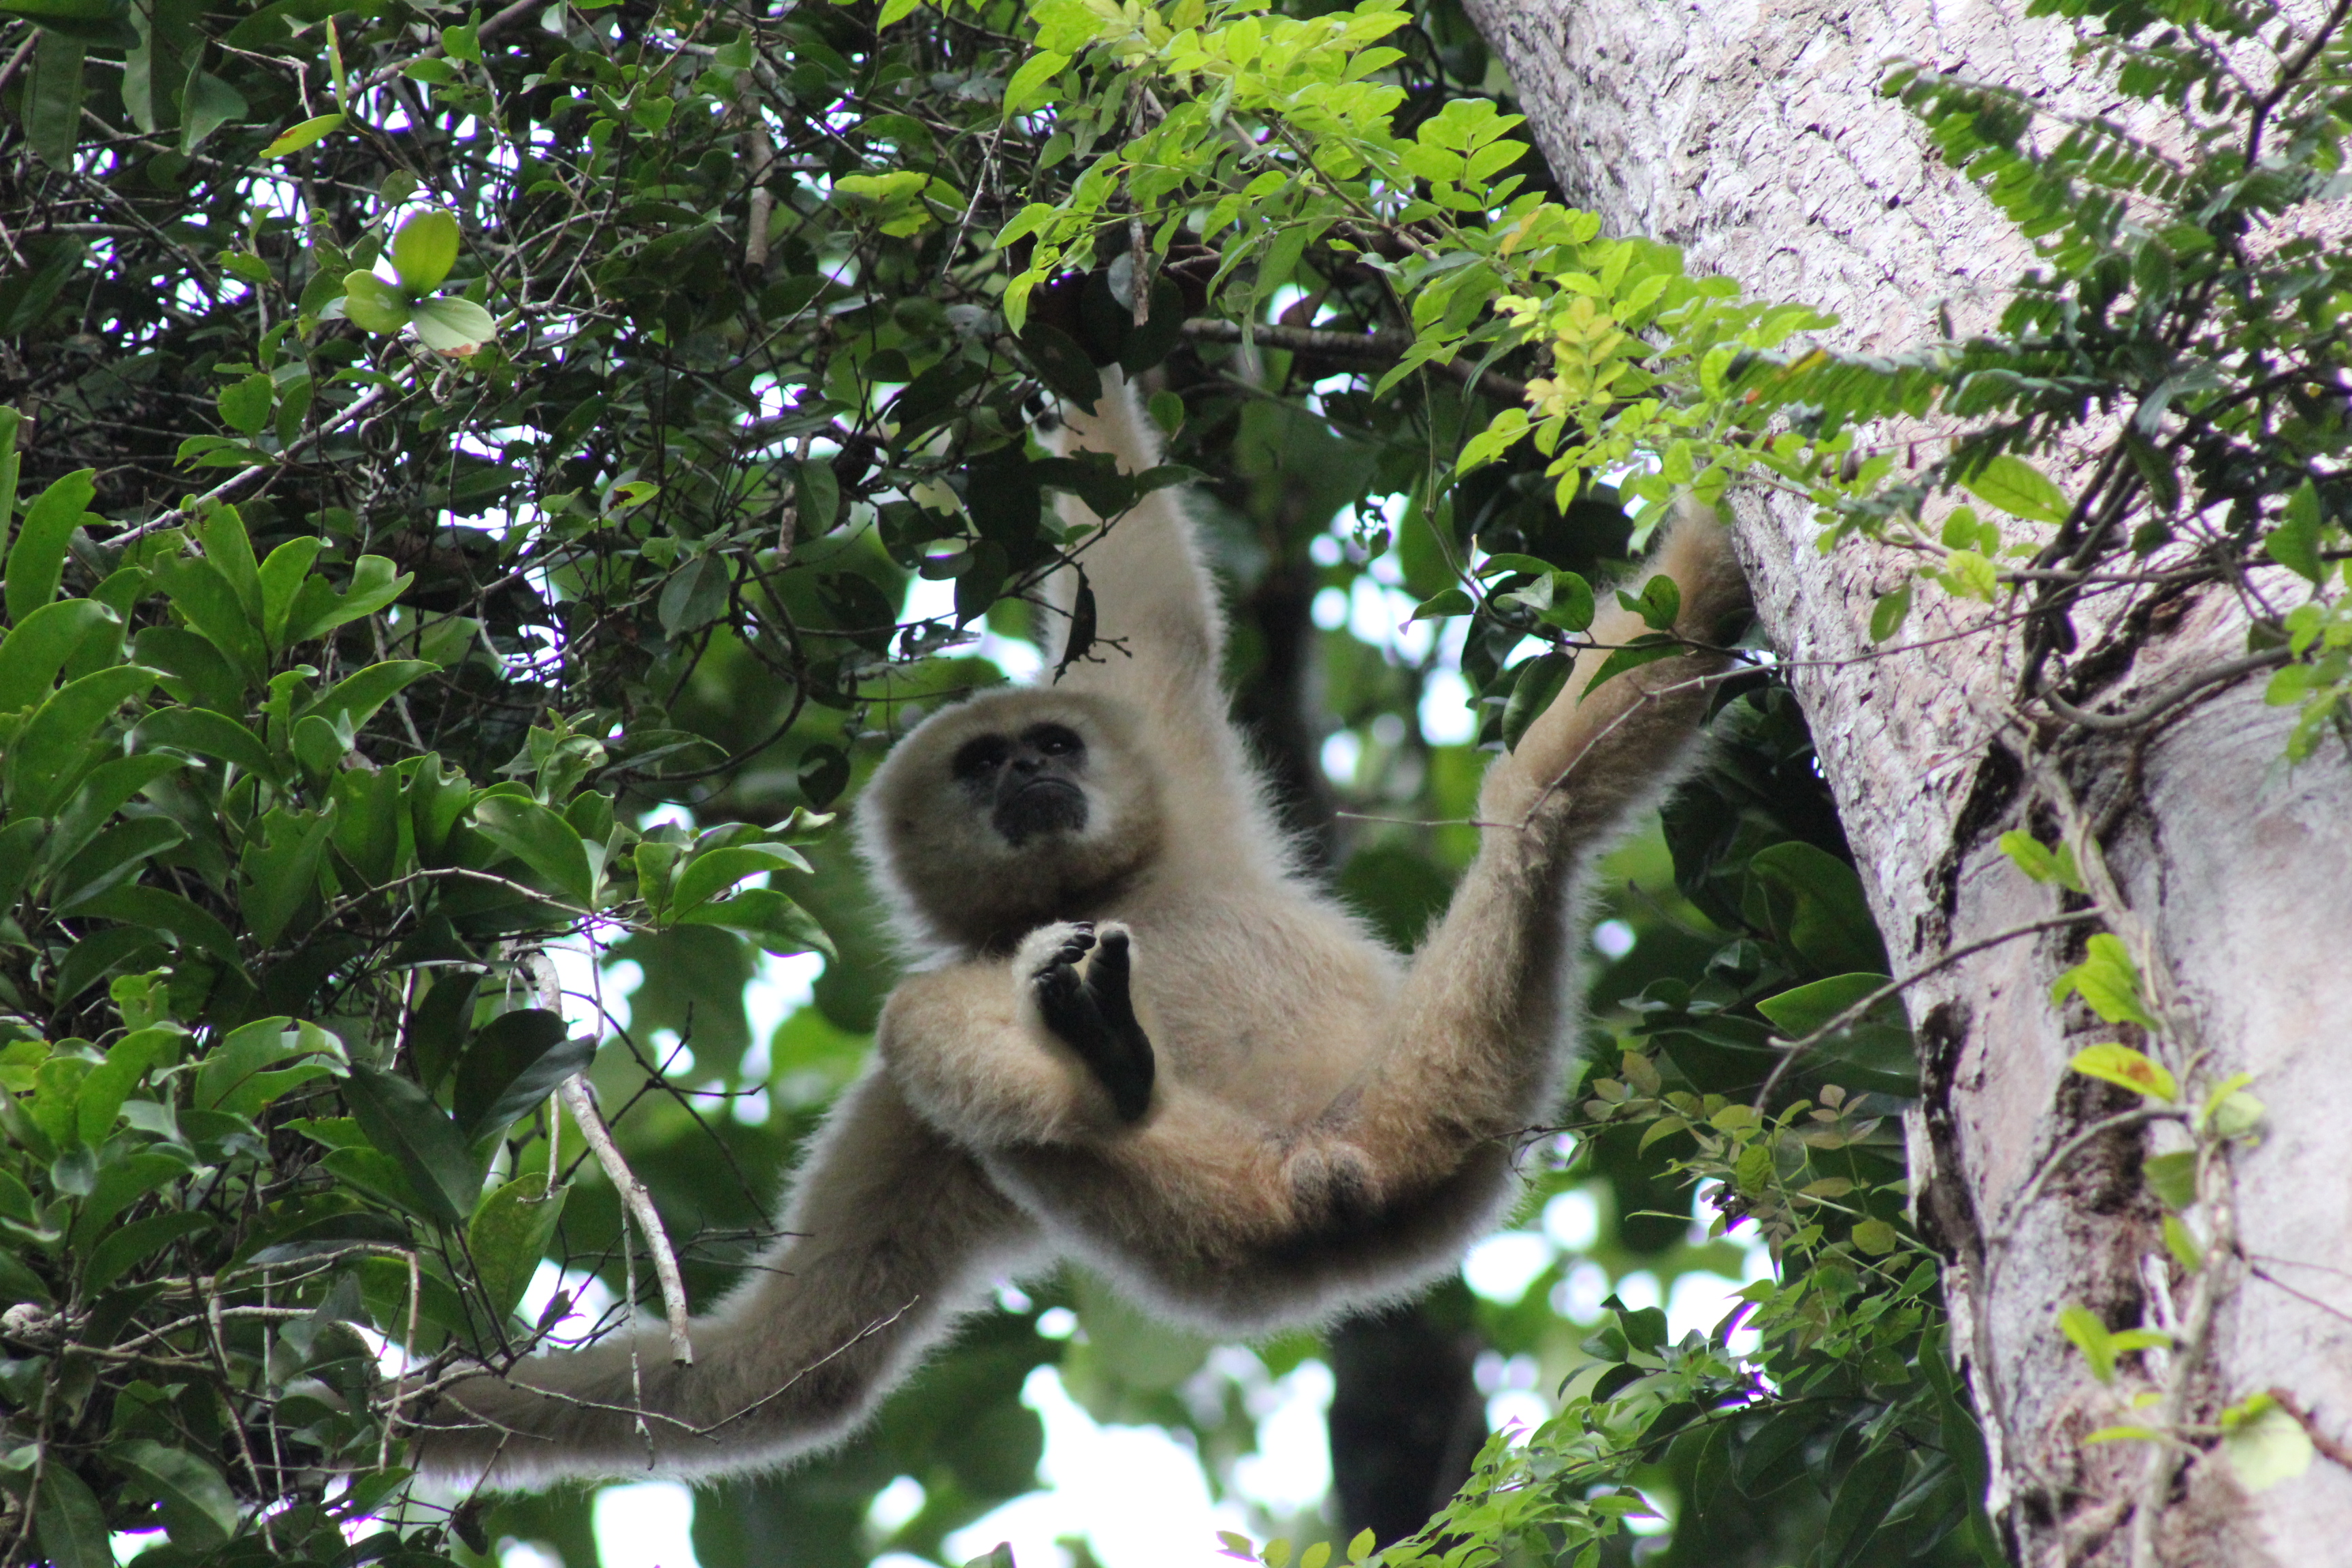 Branching out: A white-handed gibbon in Khao Yai National Park, Thailand &#8212; just one of the endless varieties of creatures on our biodiverse planet. | ANNABEL PAXTON